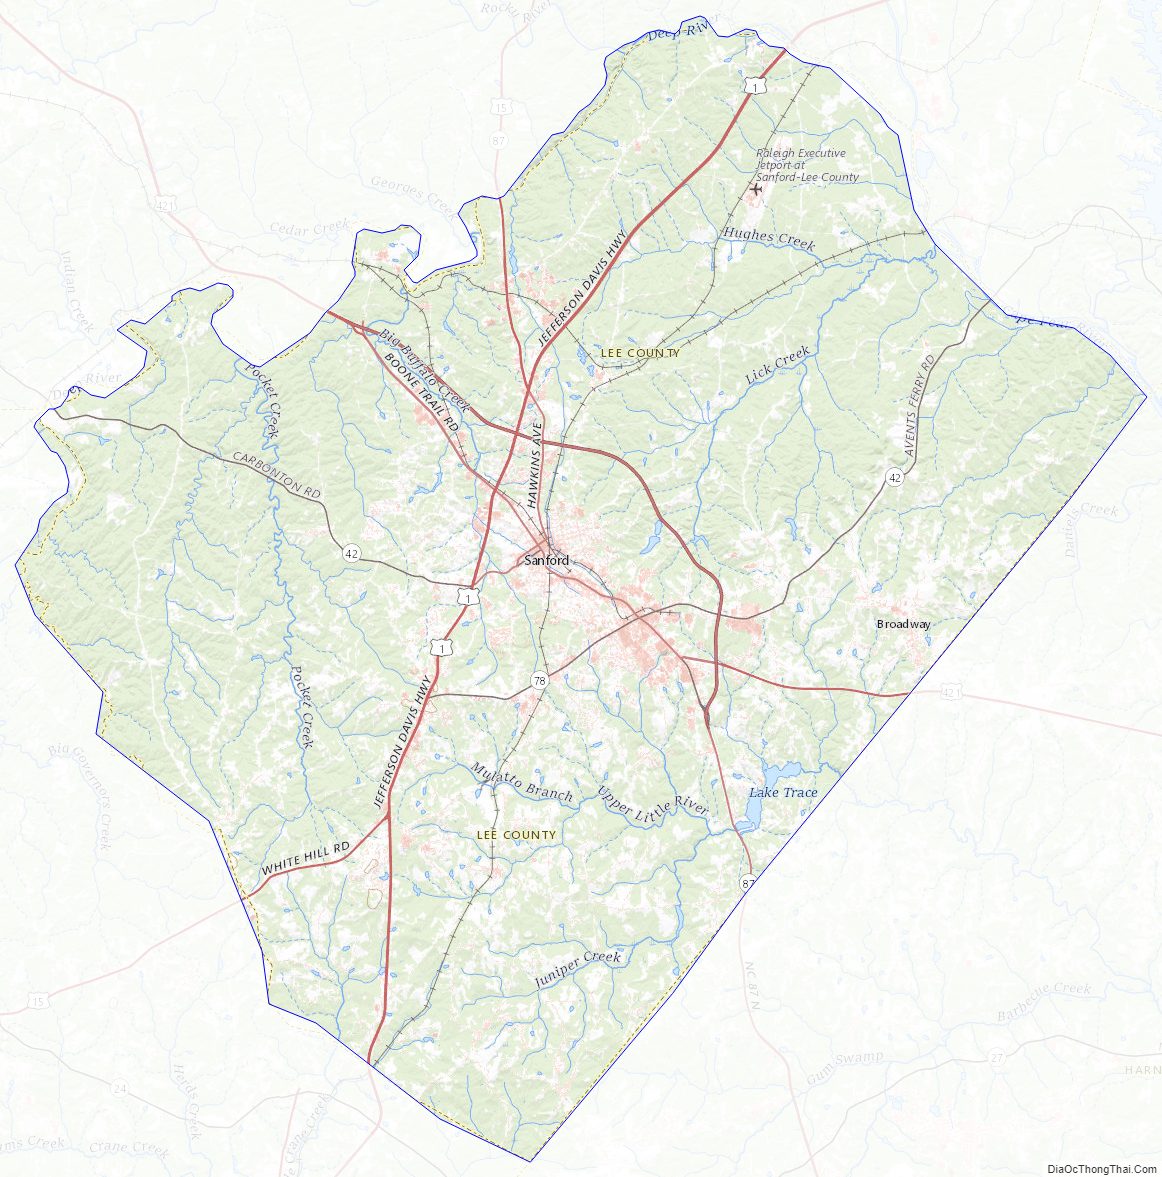 Topographic map of Lee County, North Carolina